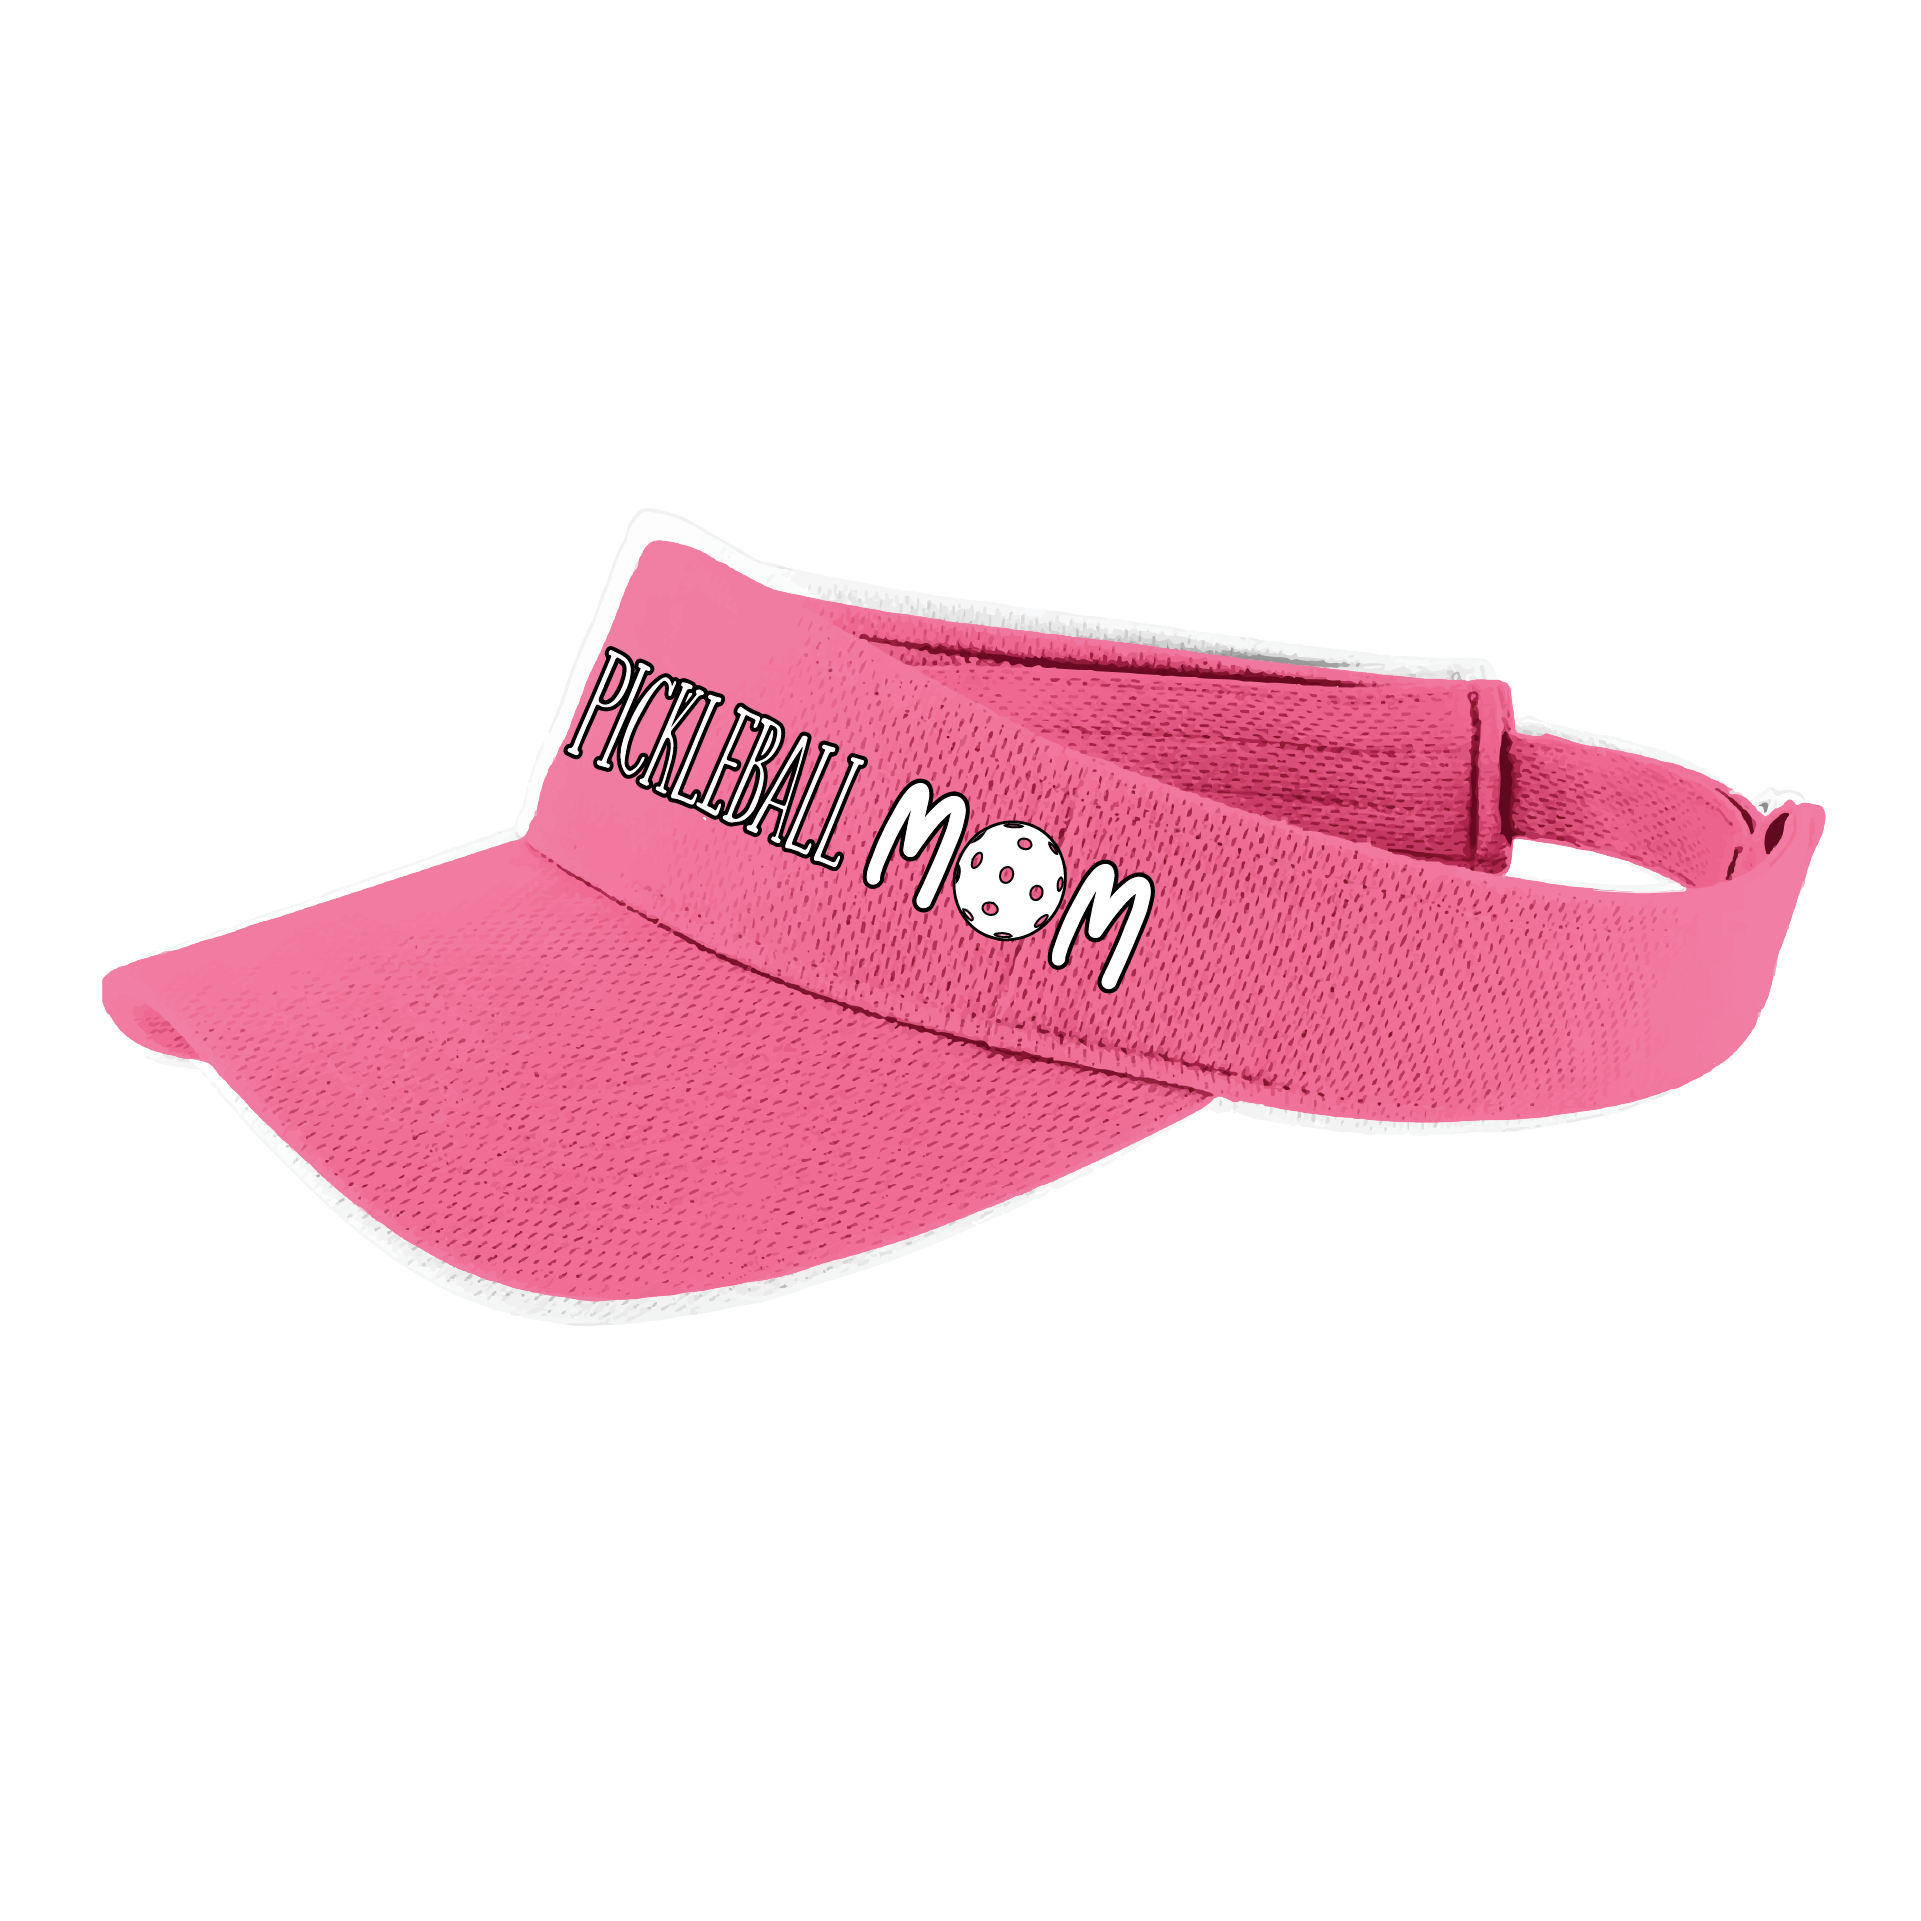 Pickleball Visor Design: Pickleball Mom Visor in White  This fun pickleball visor is the perfect accessory for all pickleball players needing to keep their focus on the game and not the sun. The moisture-wicking material is made of 100% polyester with closed-hole flat back mesh and PosiCharge Technology. The back closure is a hook and loop style made to adjust to every adult.